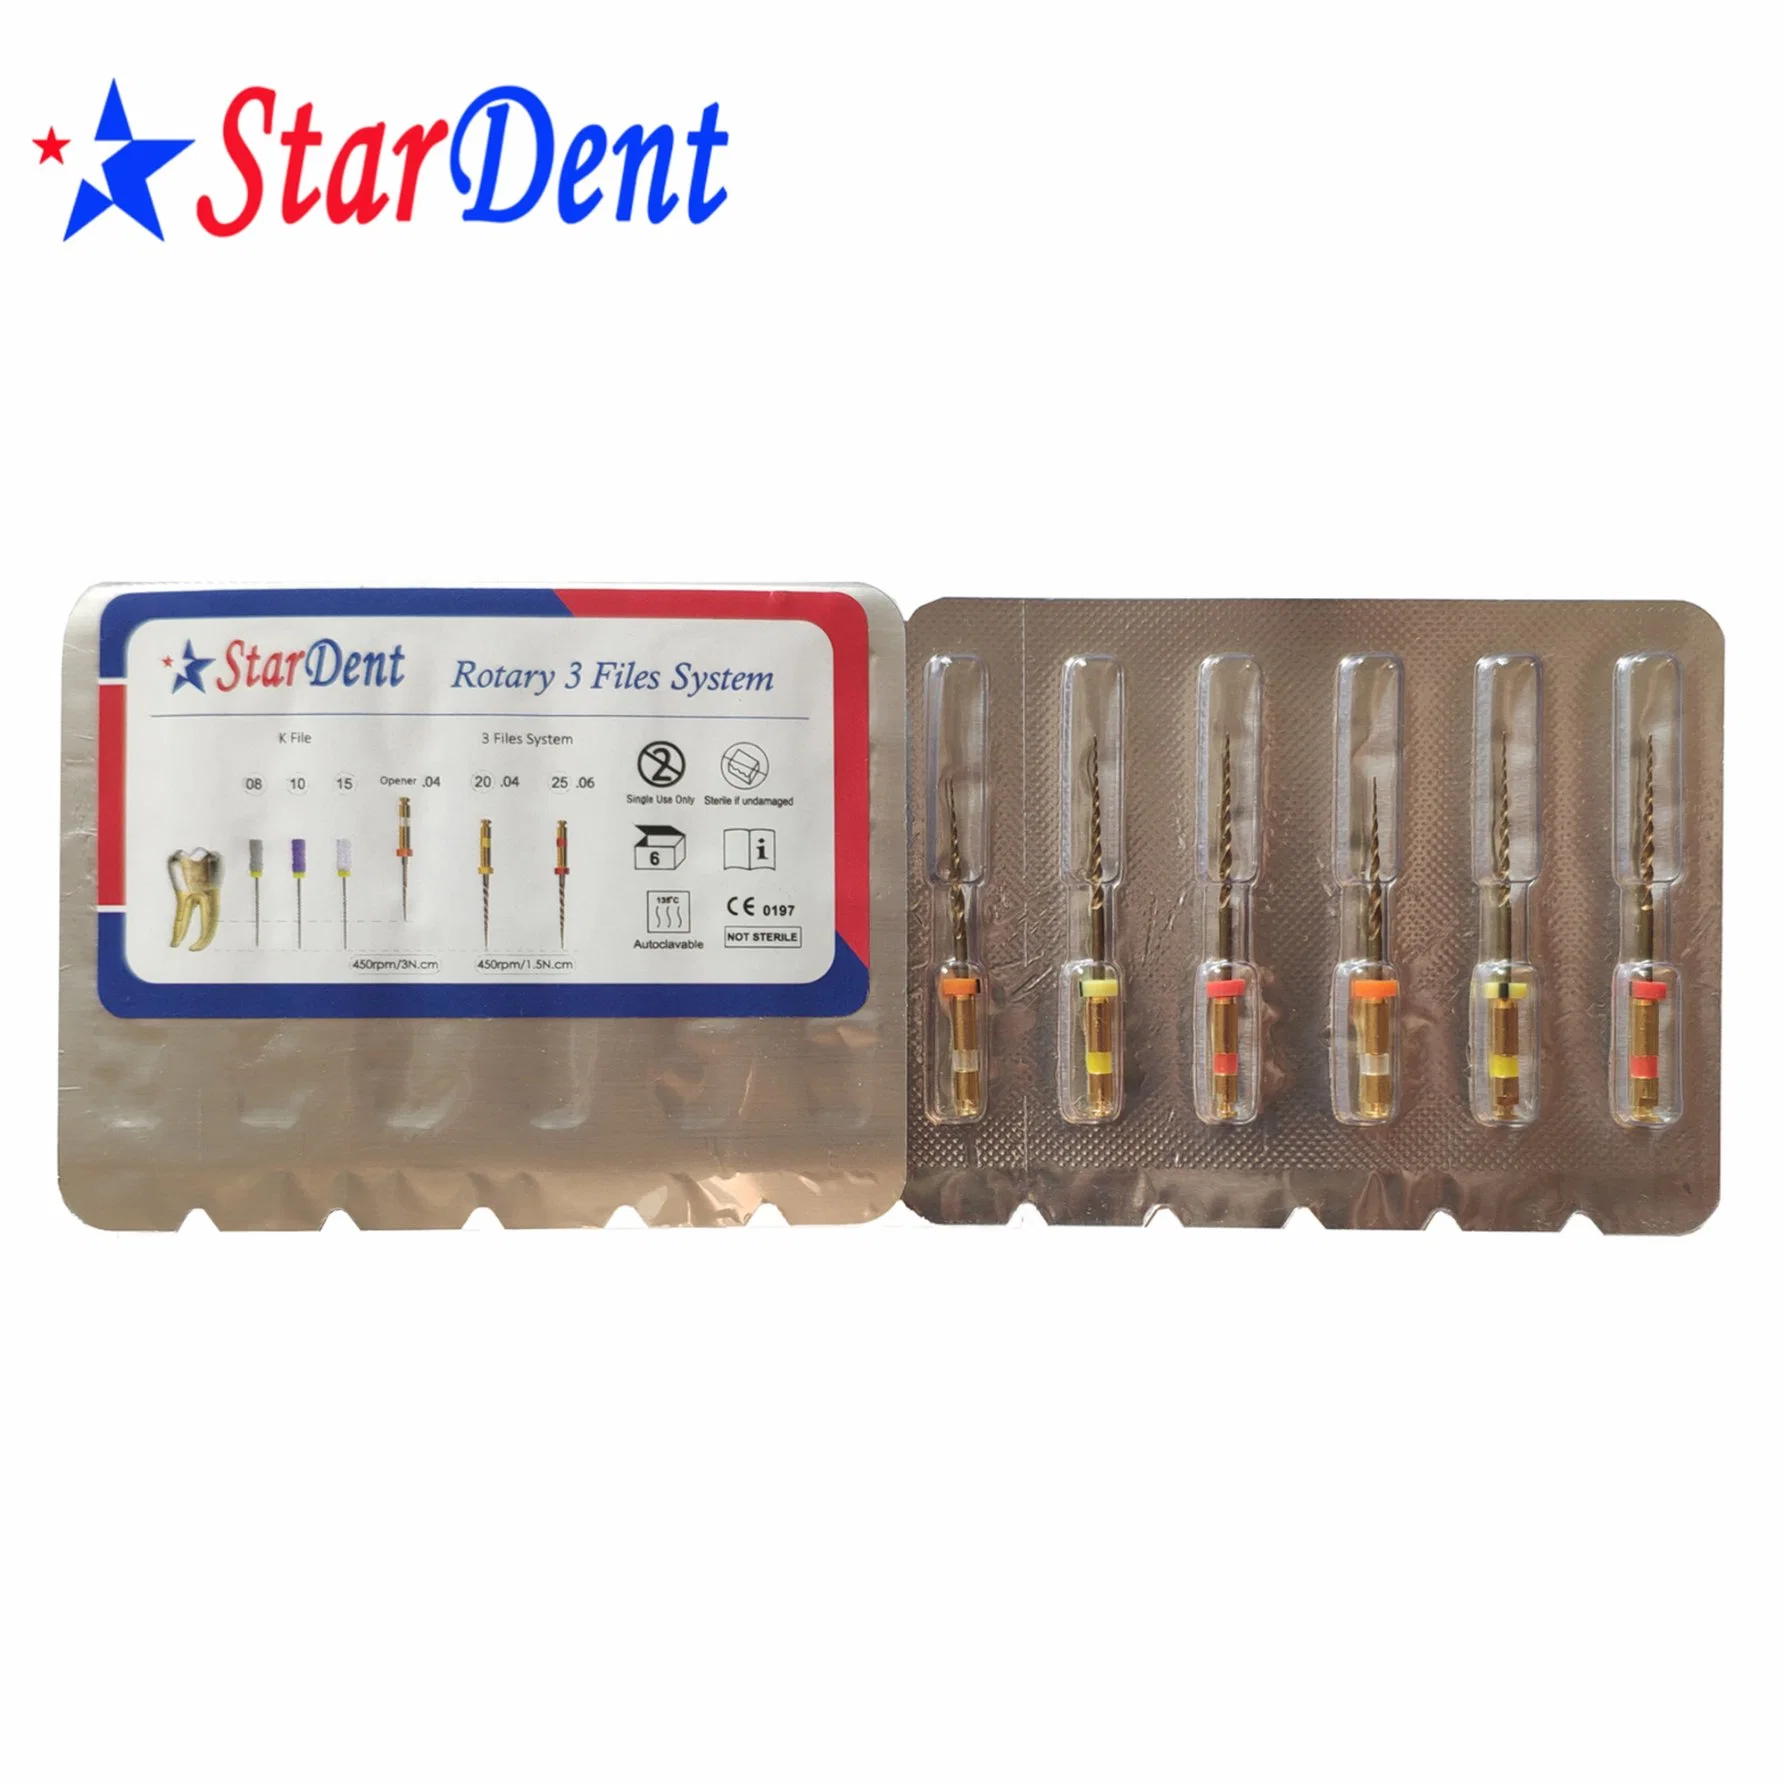 New Stardent Rotary 3 File System of Dental Clinic Hospital Medical Lab Surgical Diagnostic Dentist Equipment